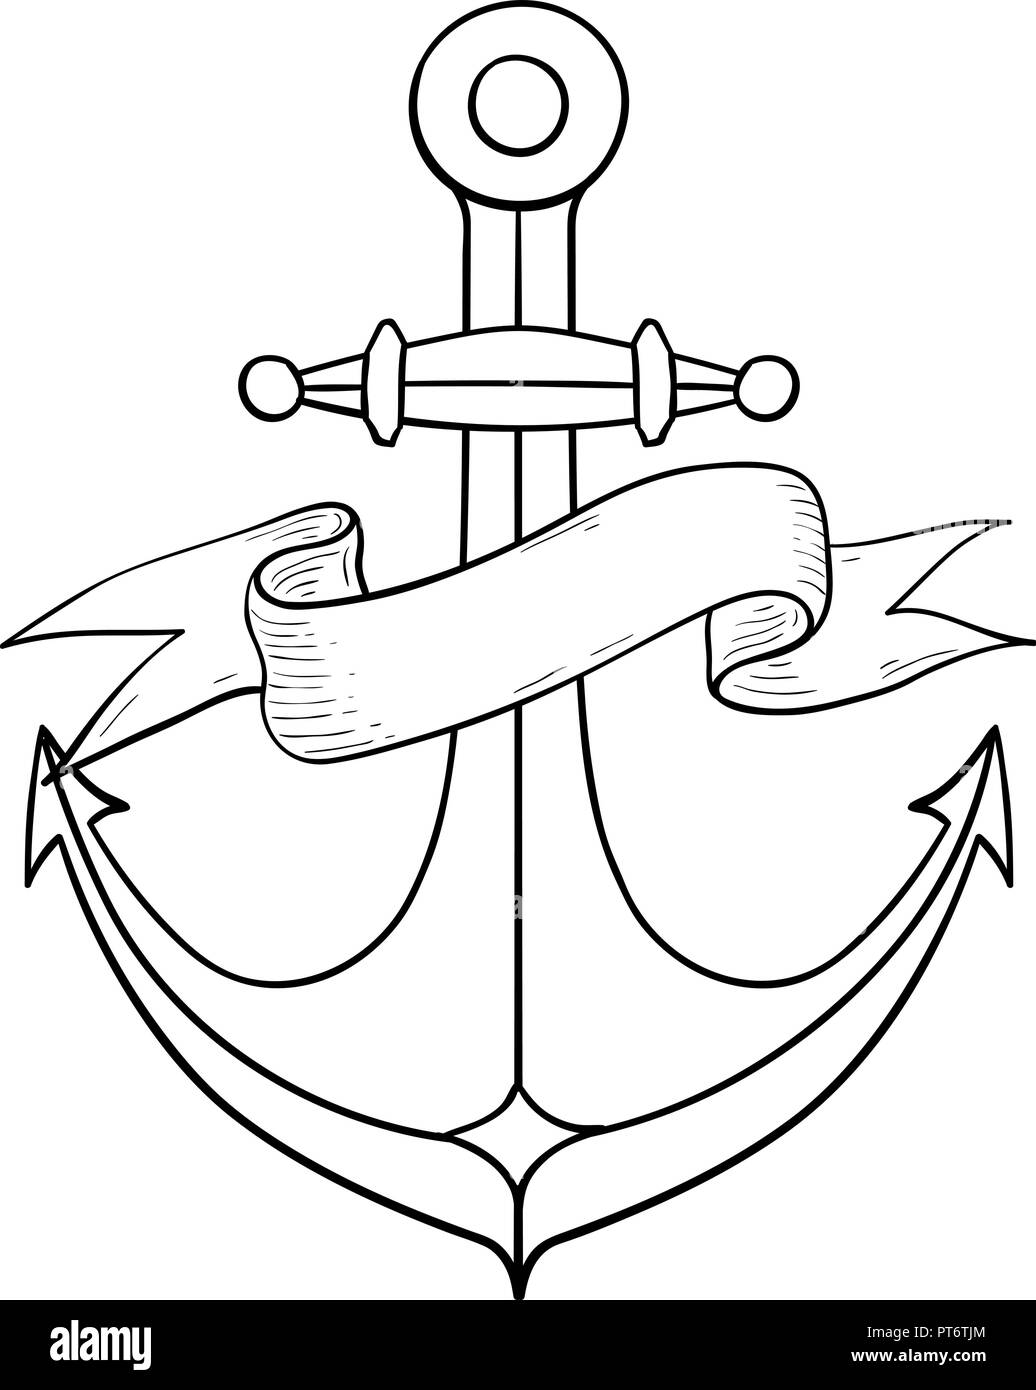 Anchor. Outline drawing, hand drawn sketch Stock Vector ...